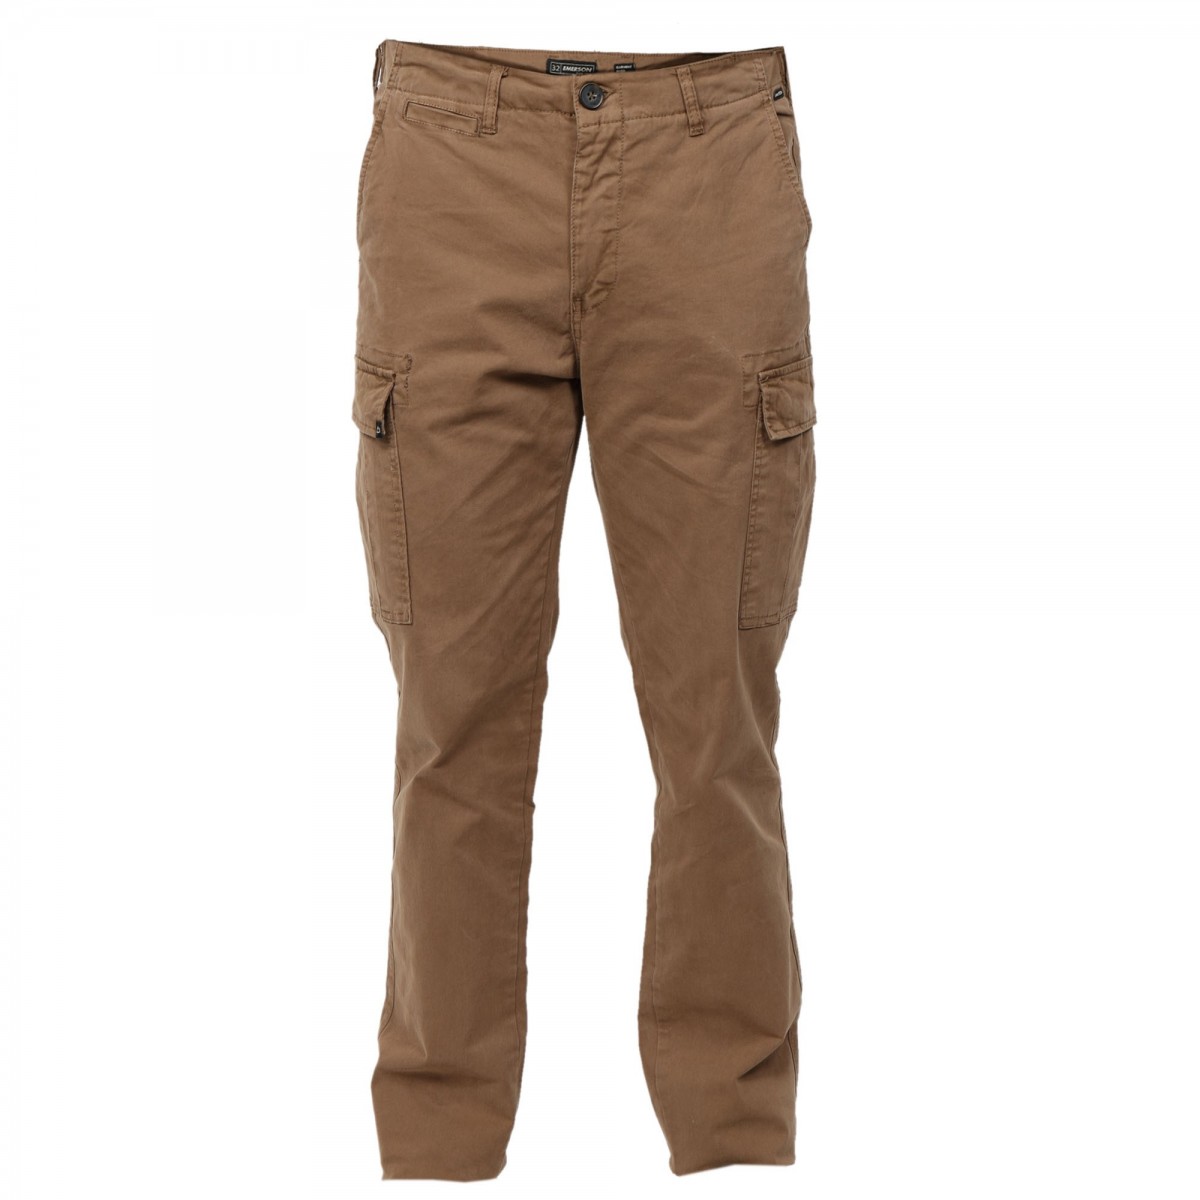 MENS GARMENT DYED STRETCH CARGO PANTS